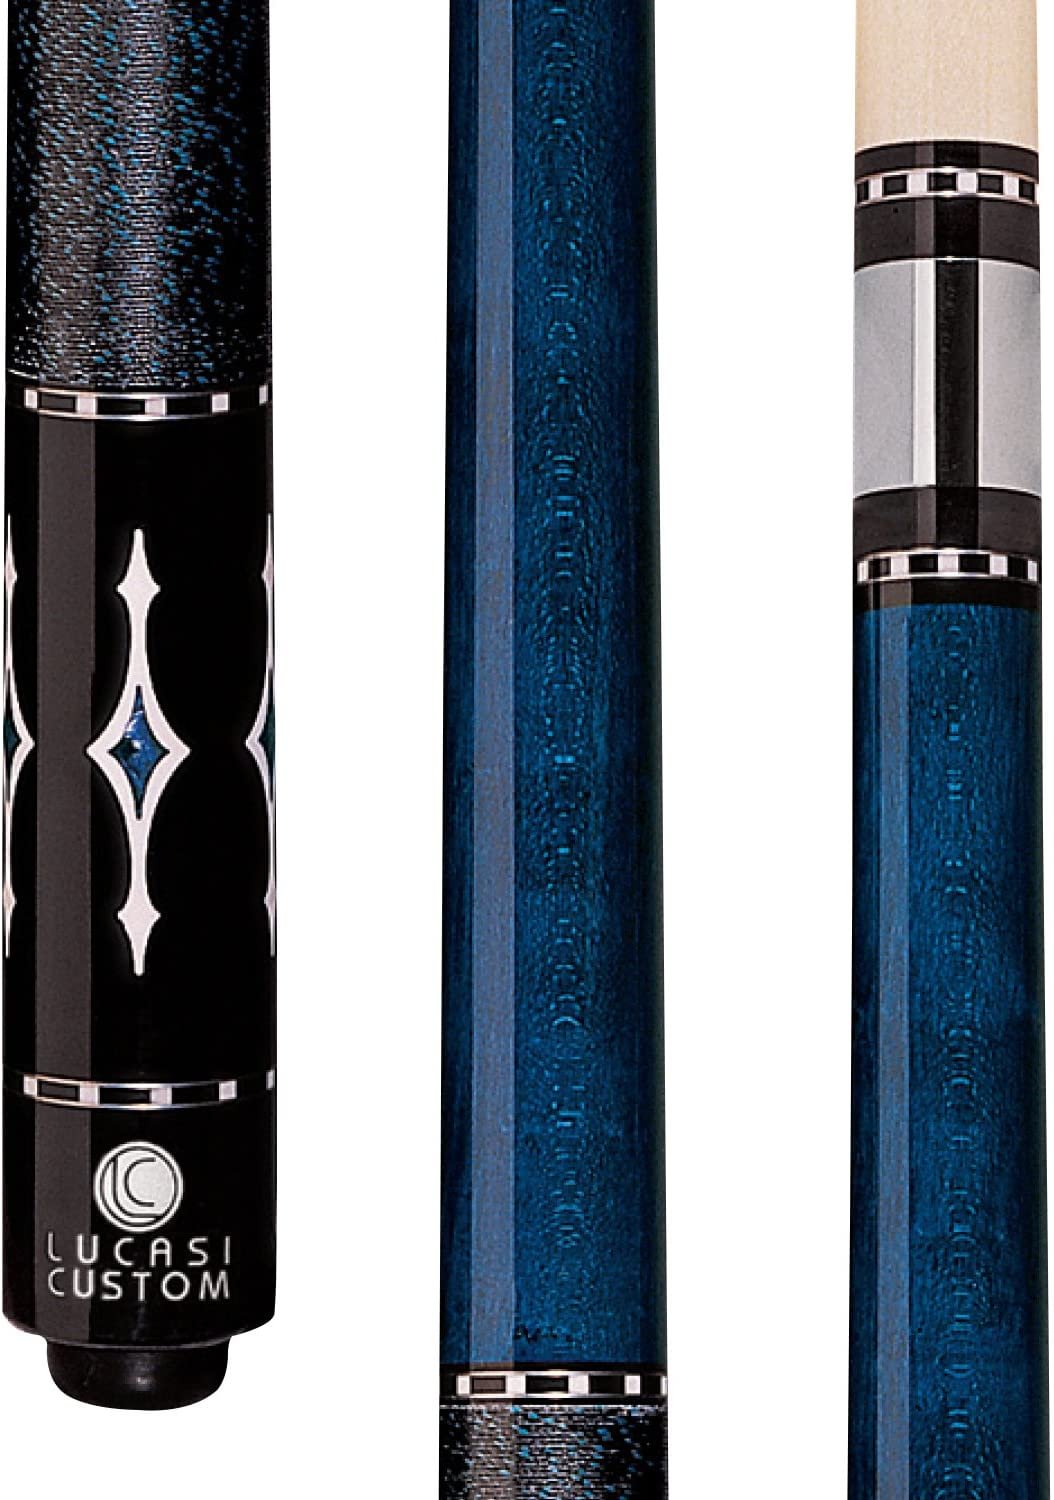 Blue Birds-Eye Pool Cue with Blue and White Diamond Inlays